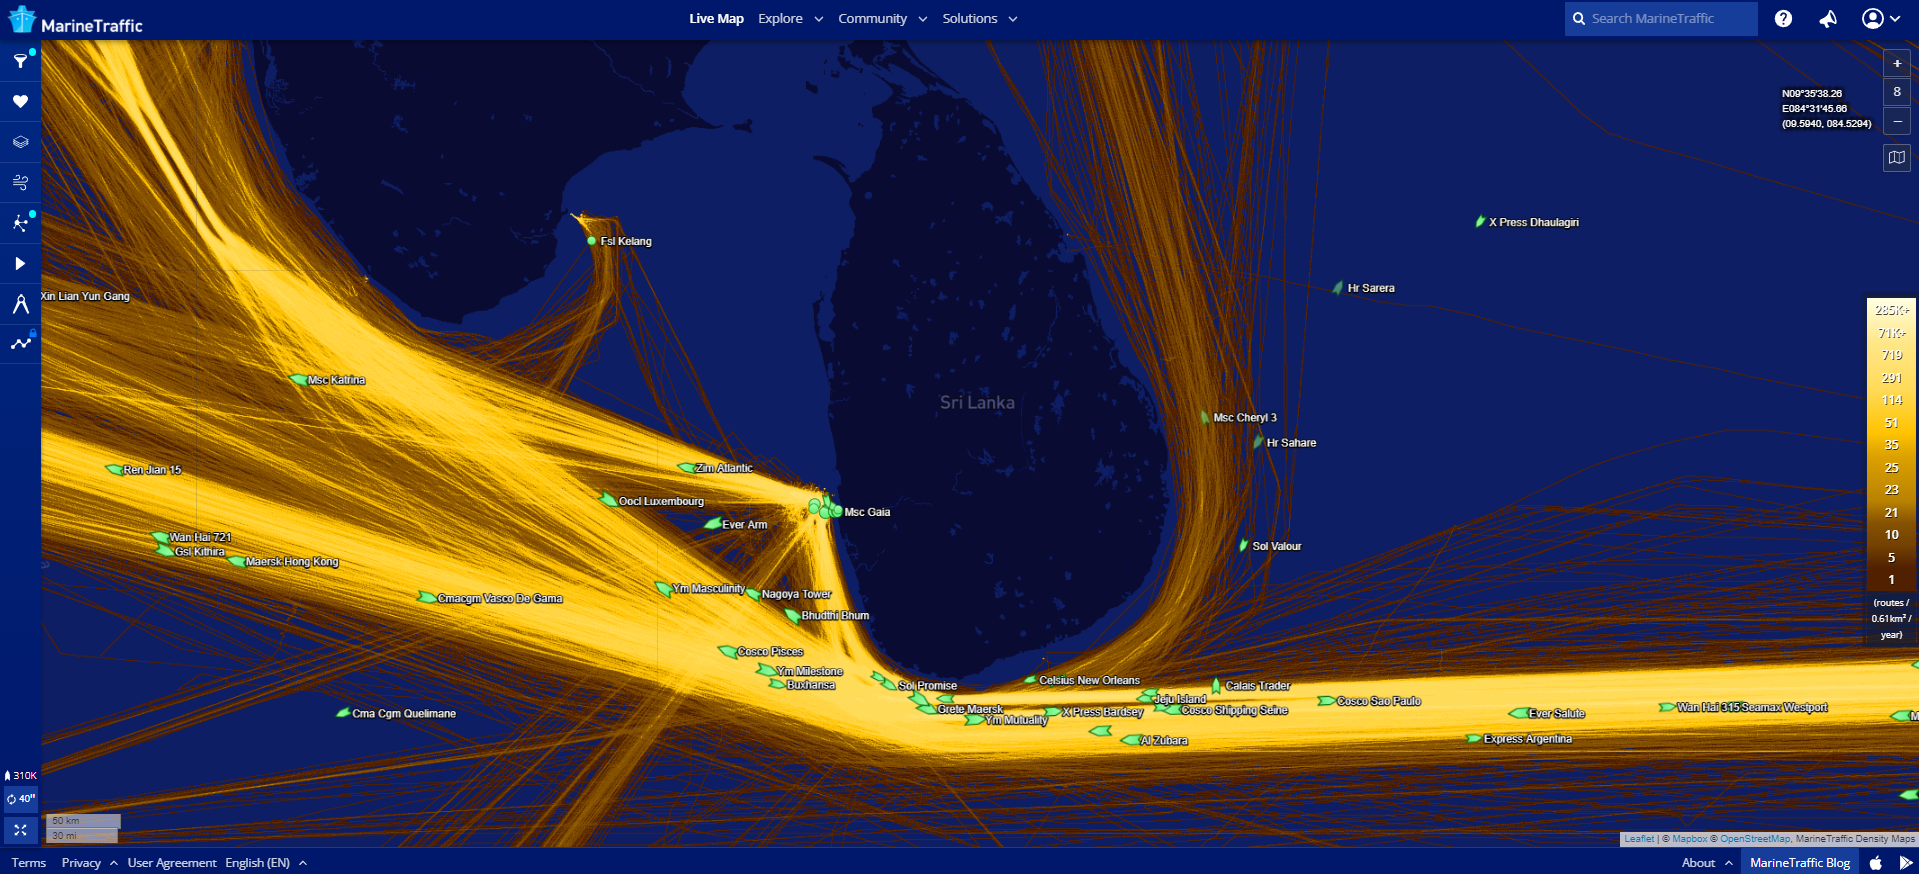 The busy shipping route along the south coast of Sri Lanka is popular with box carriers moving goods from east to west. It is also an important breeding ground for blue whales. Image: MarineTraffic Density Maps 2021